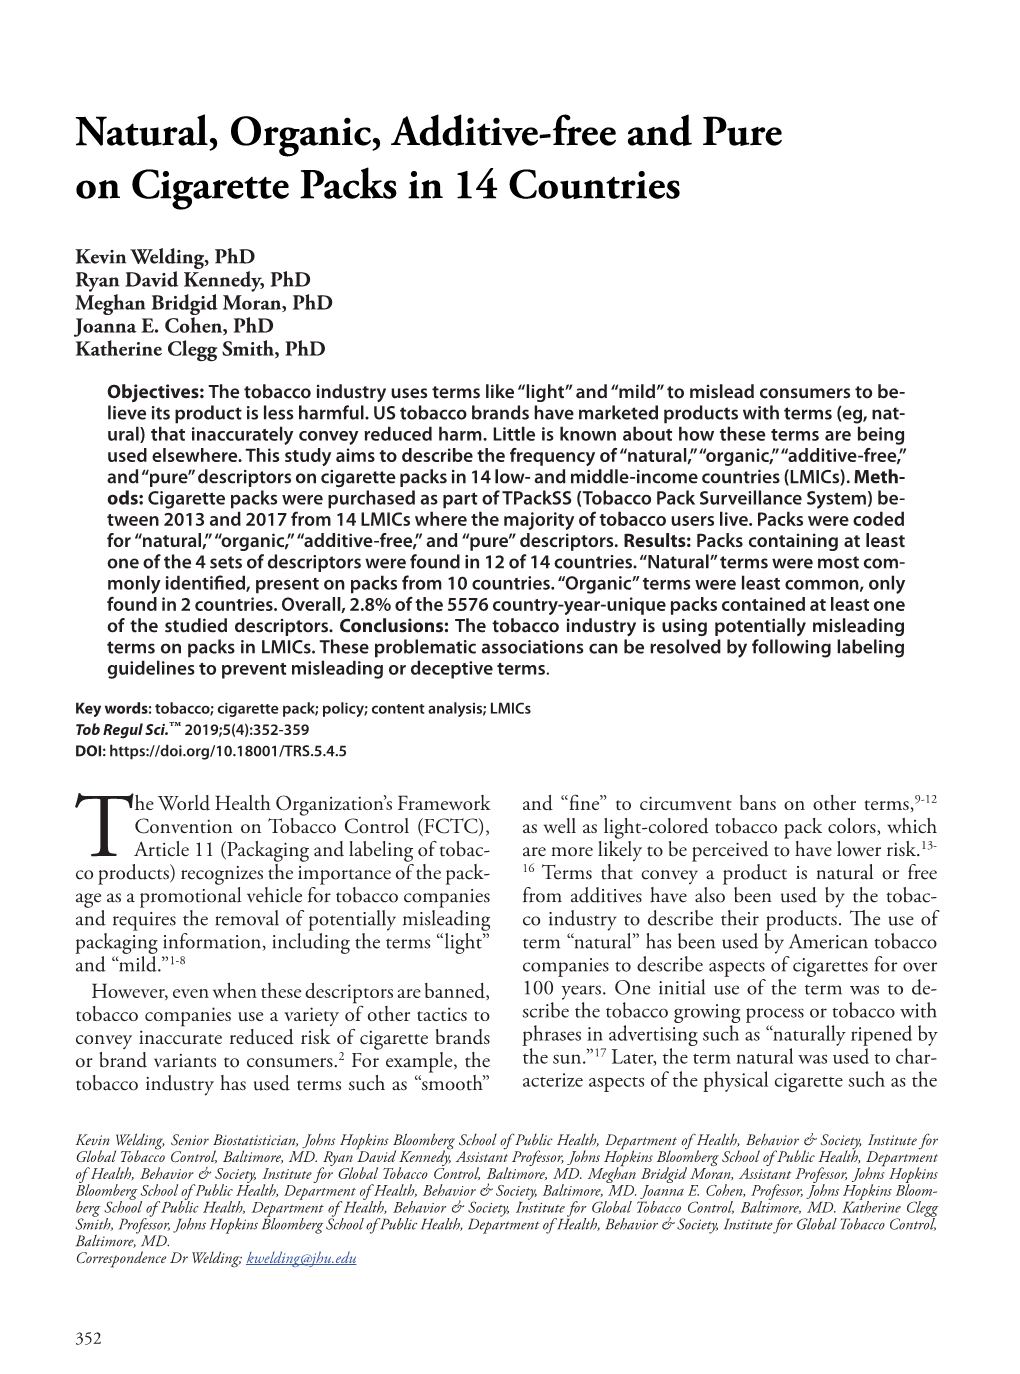 Natural, Organic, Additive-Free and Pure on Cigarette Packs in 14 Countries